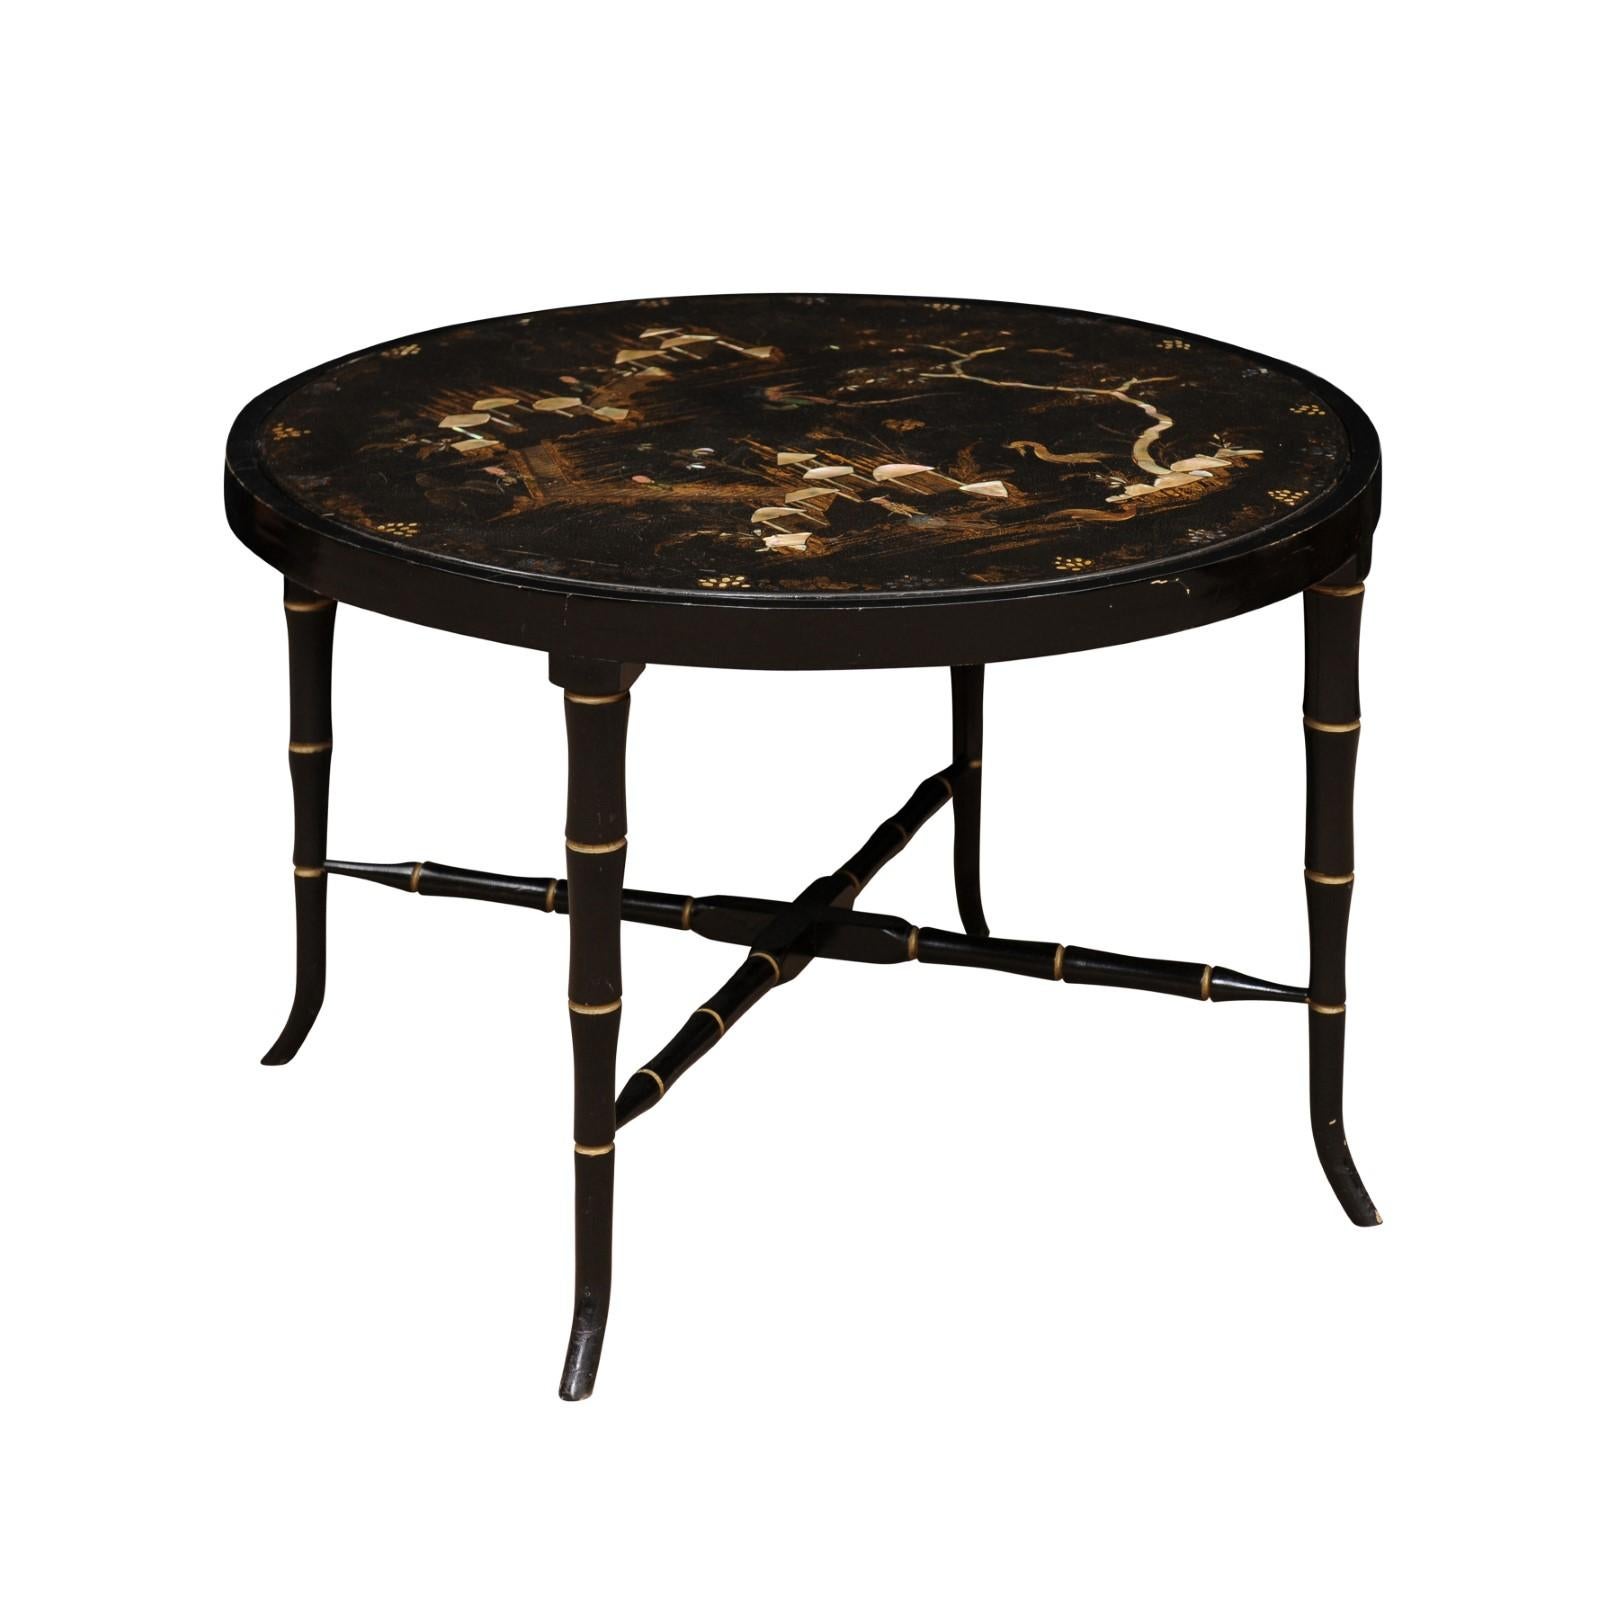 Chinoiserie Black Lacquered Cocktail Table with Mother of Pearl Inlay, 20th Century